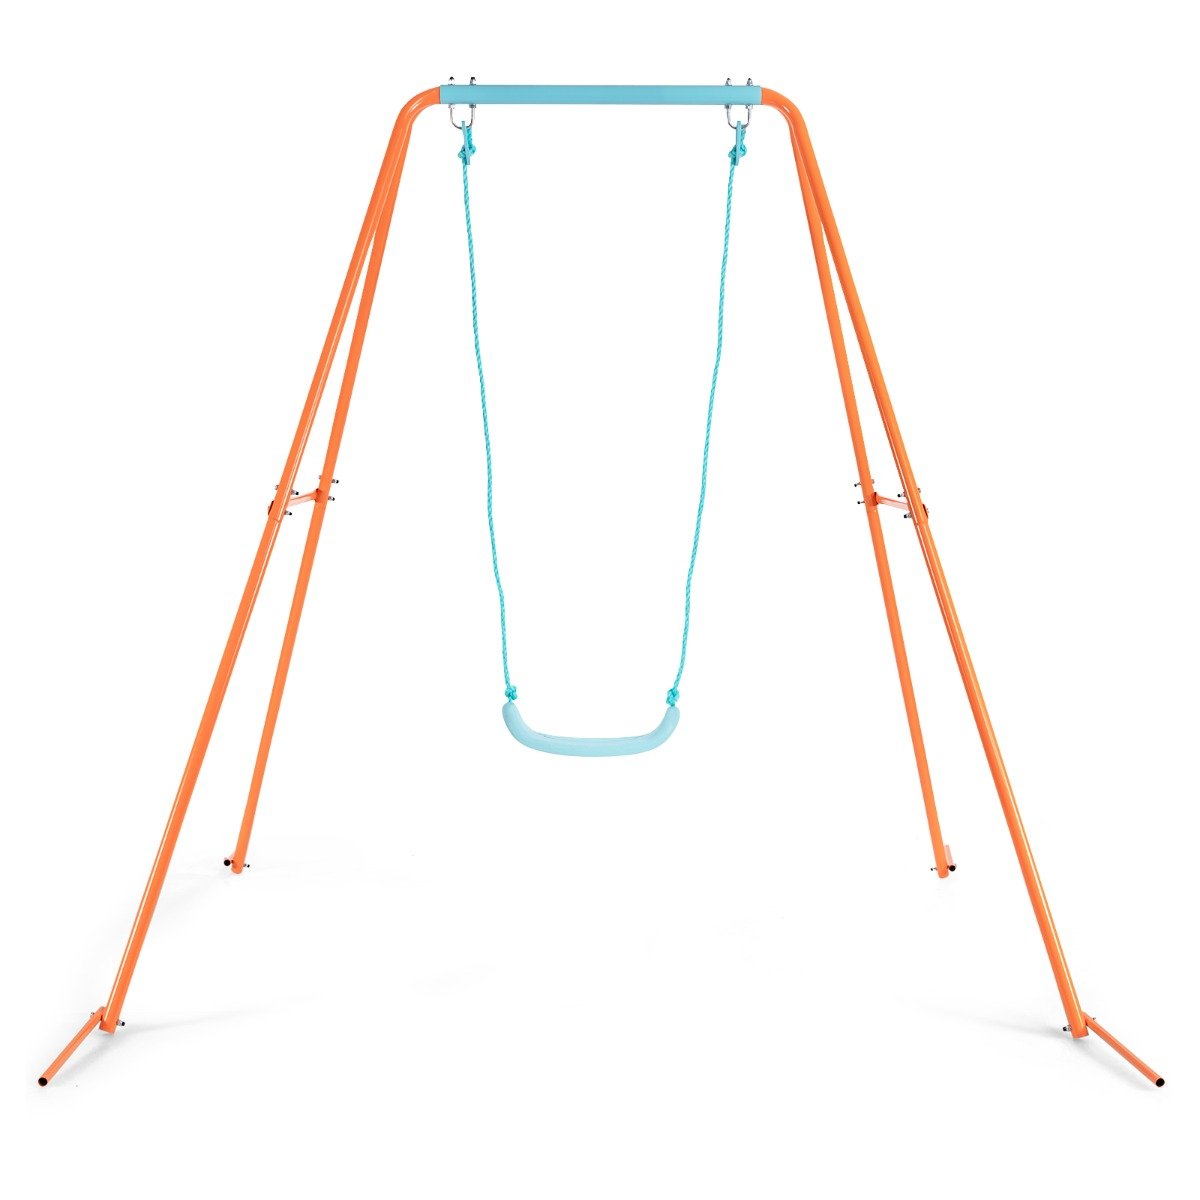 Stable A-Frame Metal Swing Set: Vibrant Orange Outdoor Play